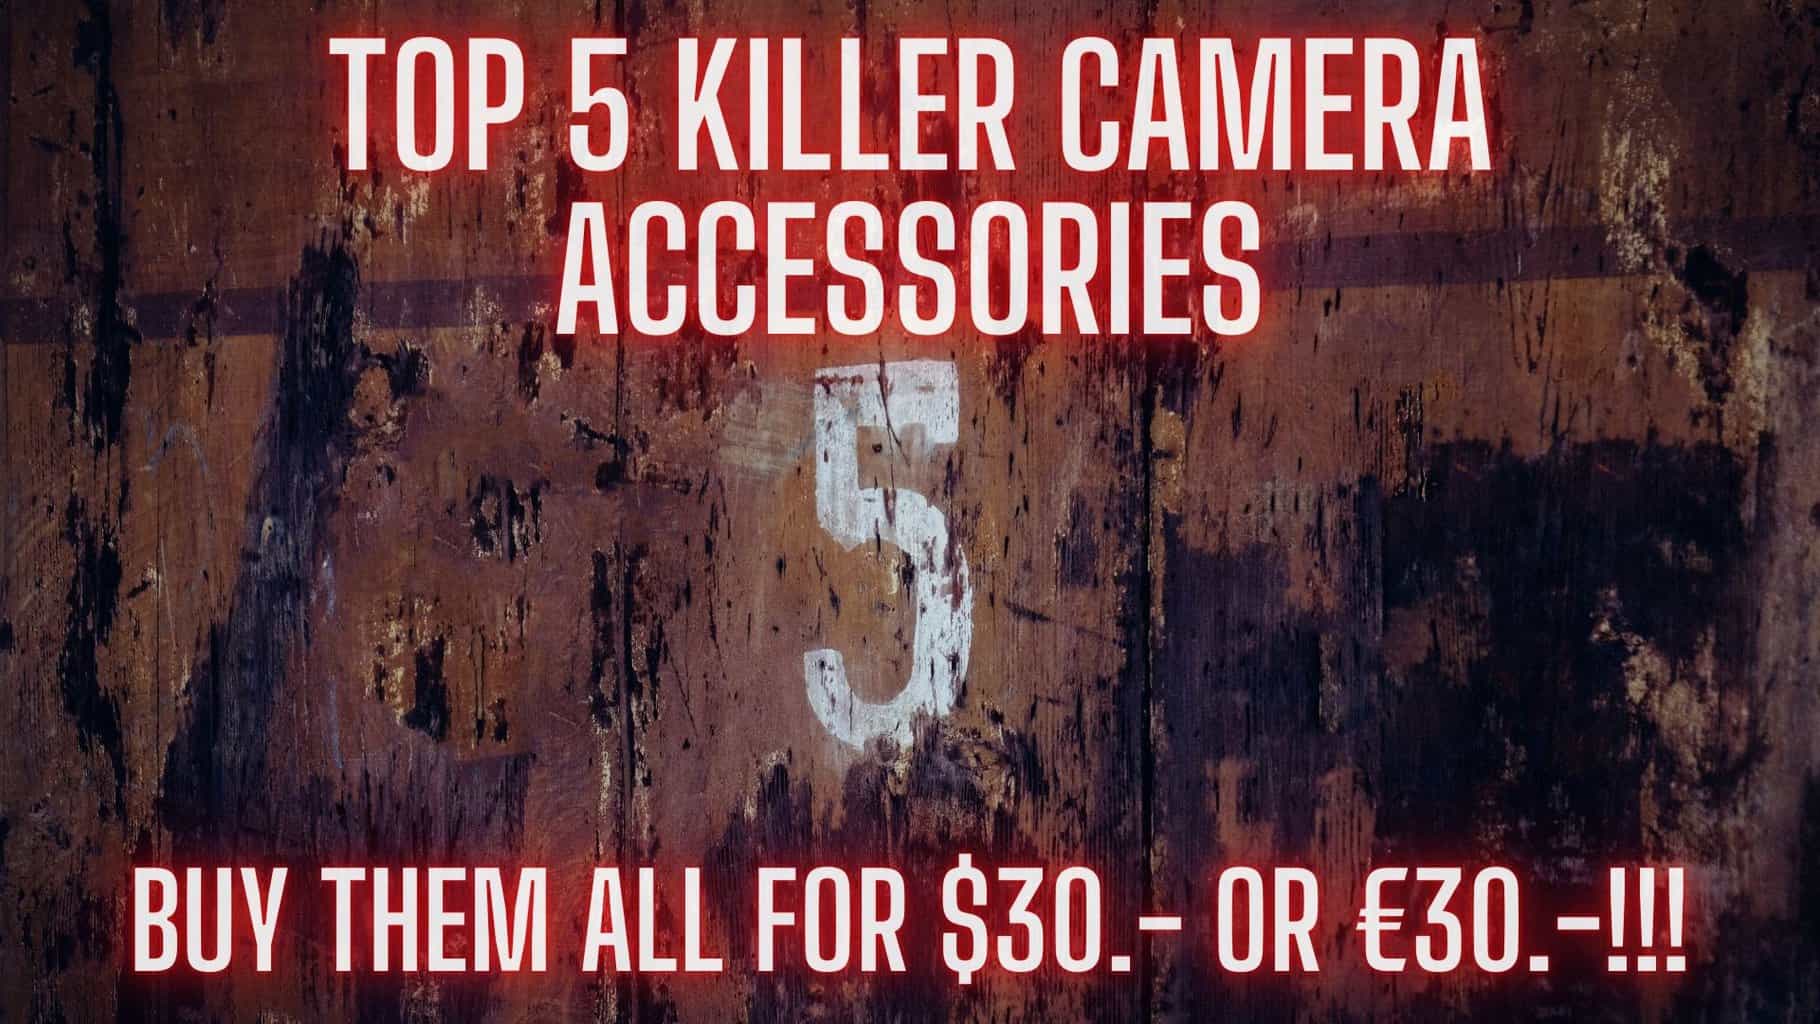 My killer top 5 camera accessories you should have for your camera.